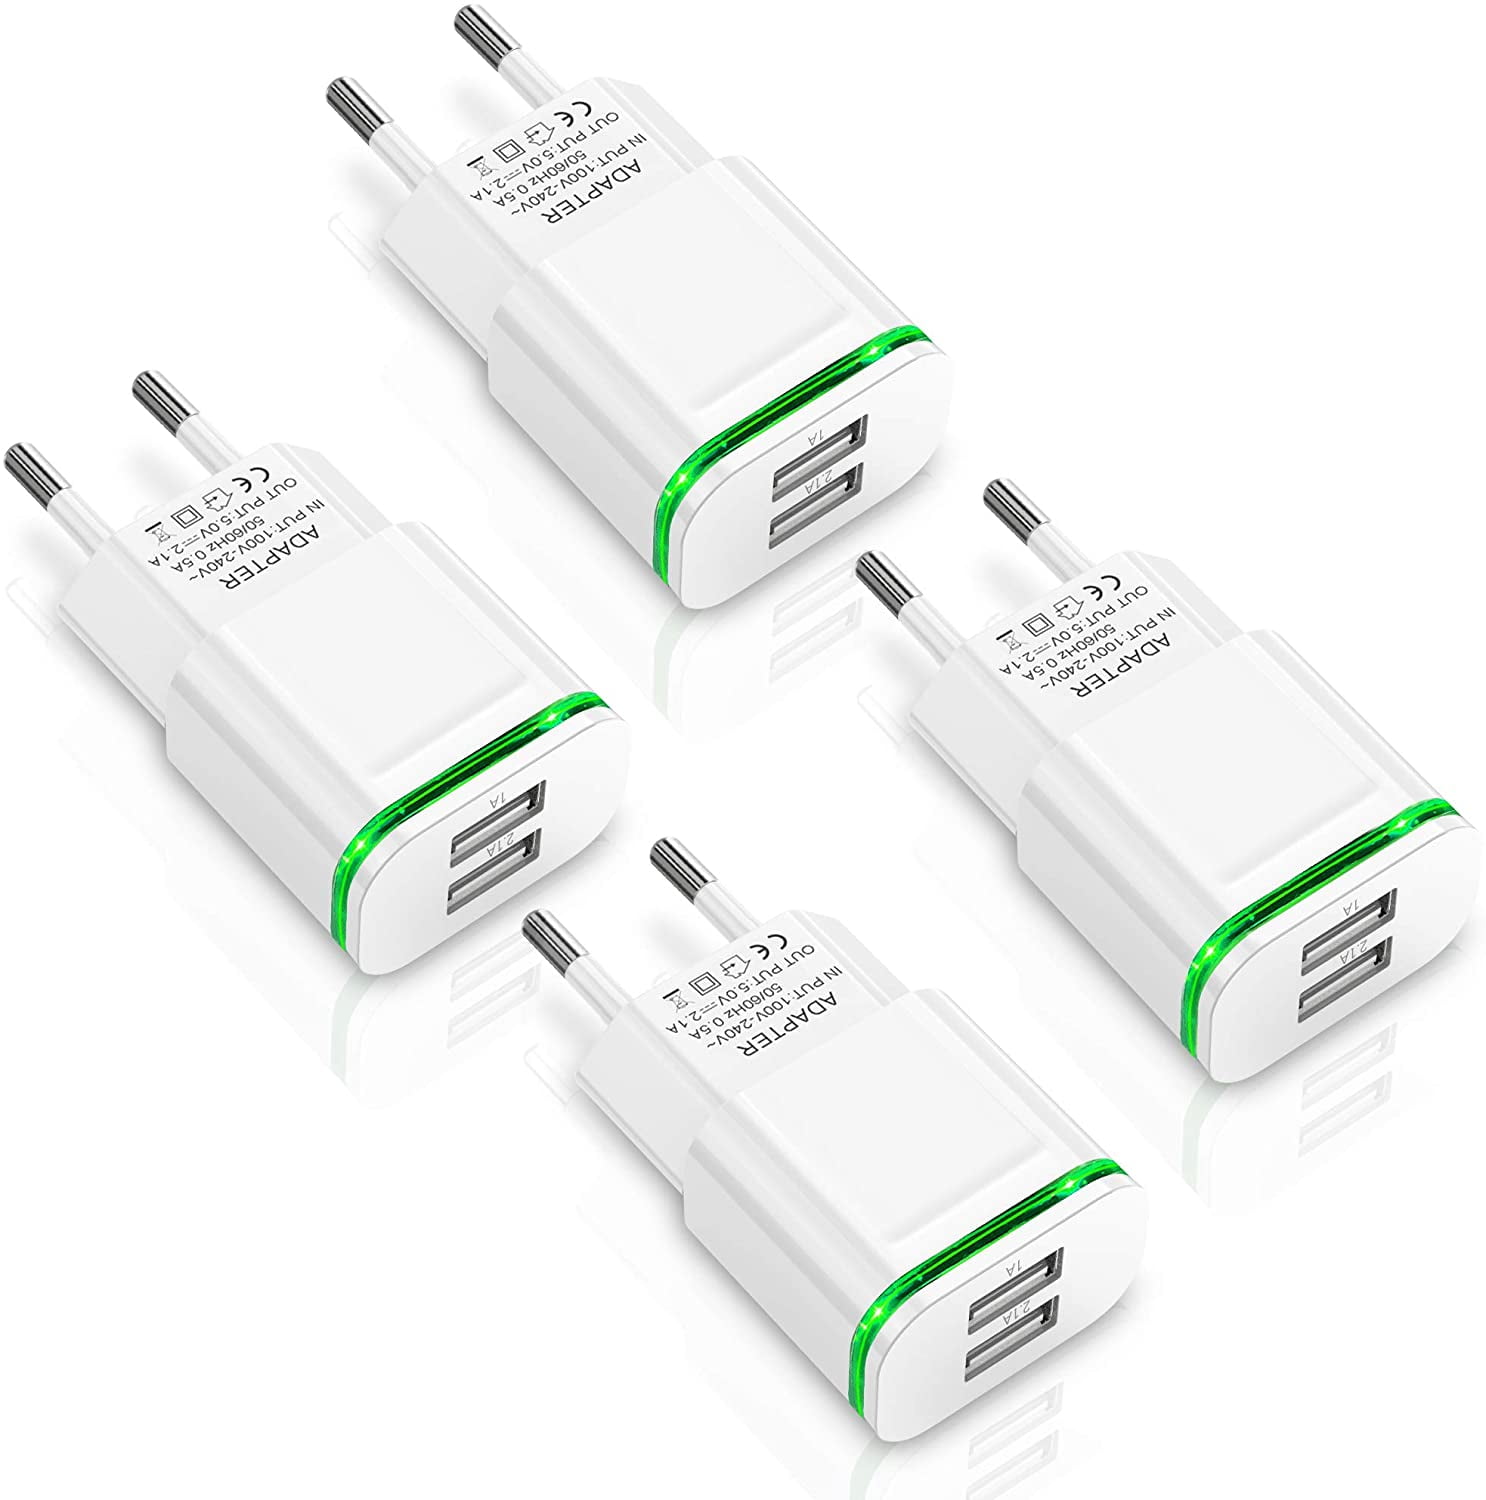 Blind sejle Beloved 4-Pack European Plug Adapter, LUOATIP 2.1A Europe Dual USB Wall Charger  Travel Power Adaptor for iPhone 13 12 11 XS Max XR X 8 7 6 6S Plus 5 5S 5C  SE, Samsung Galaxy, Pad, LG - Walmart.com